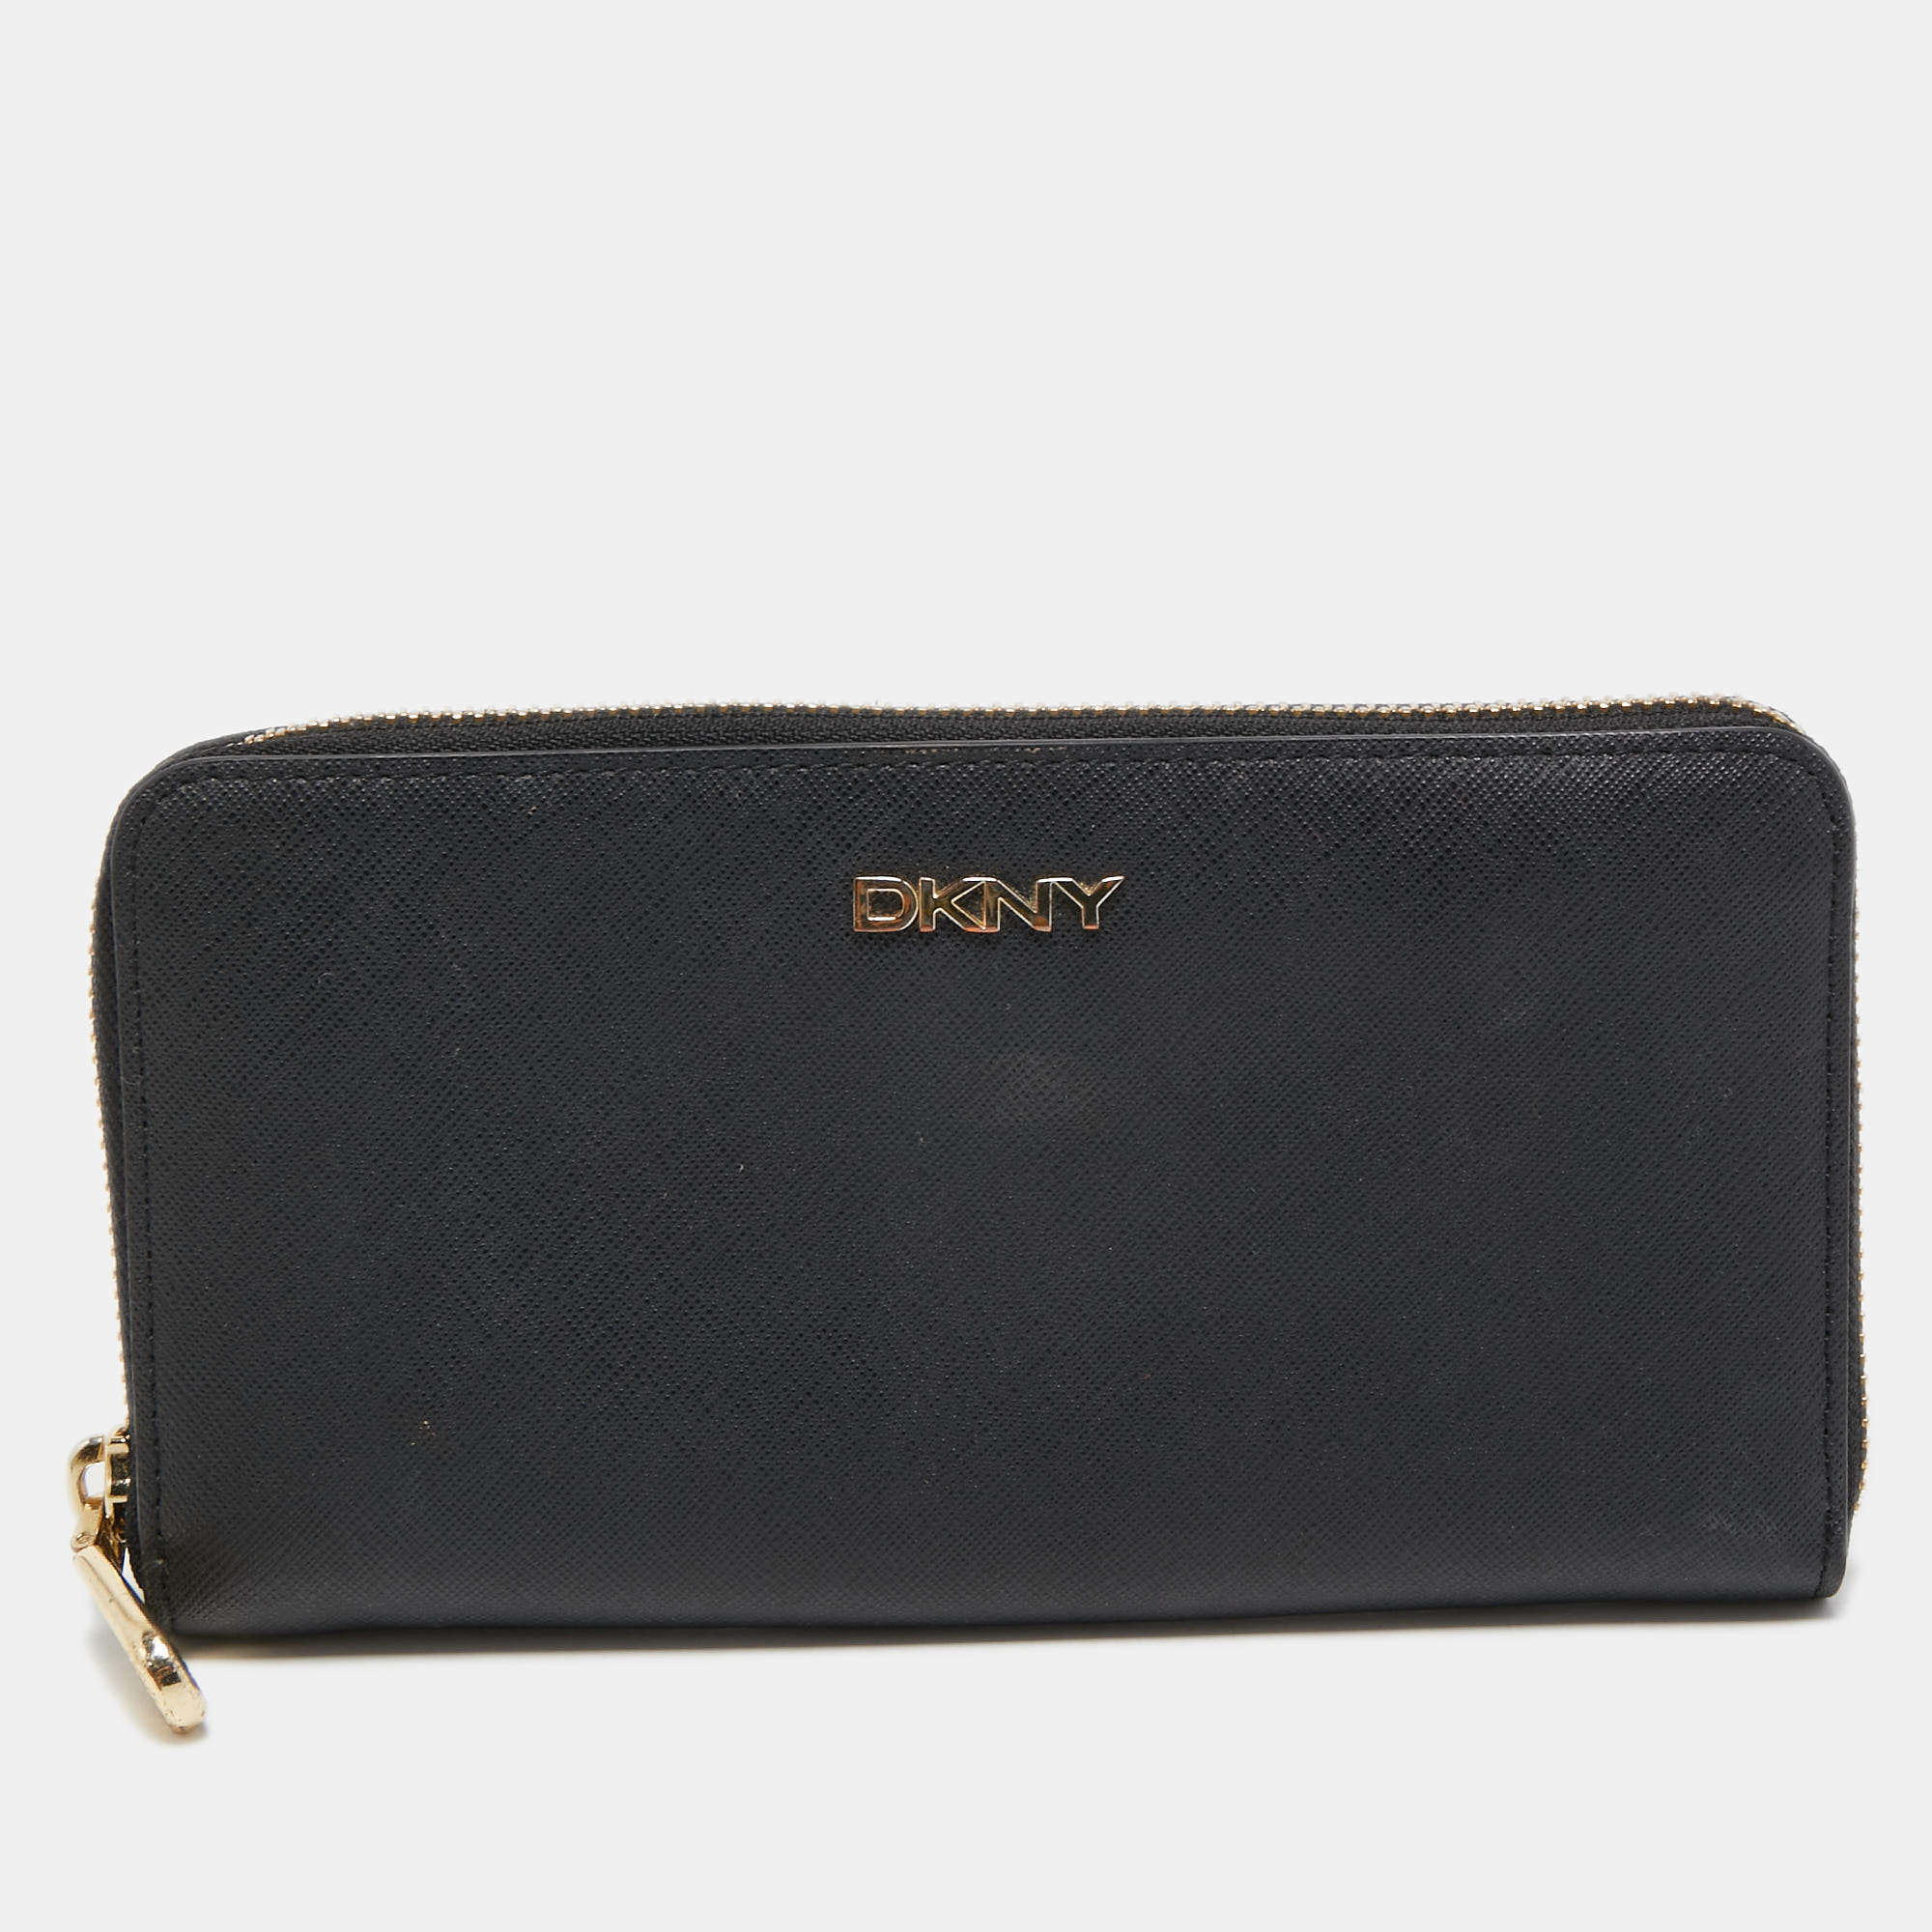 DKNY Town and Country Small Logo Wallet | SportsDirect.com USA